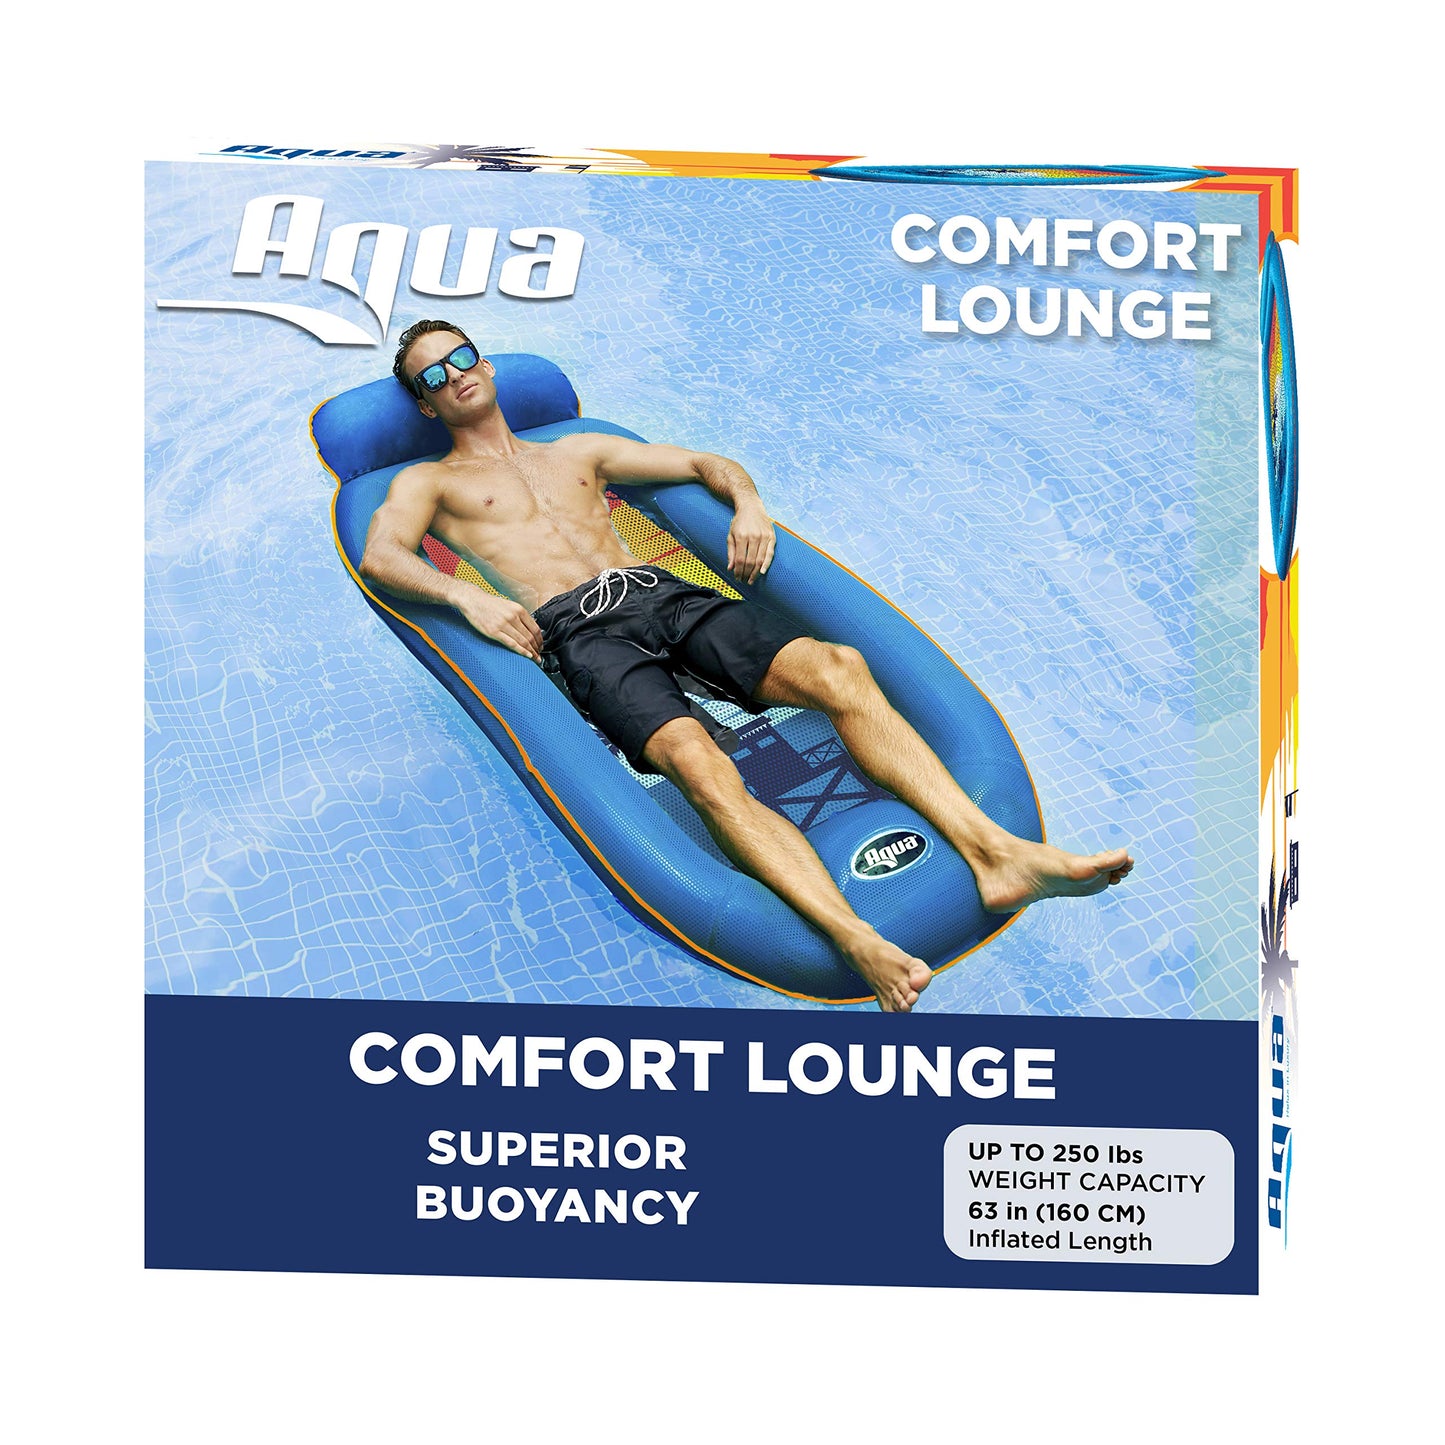 Aqua Luxury Comfort Pool Float Lounges, Recliners – Multiple Colors/Styles – for Adults and Kids Floating Blue/Orange Sunset Comfort Lounge